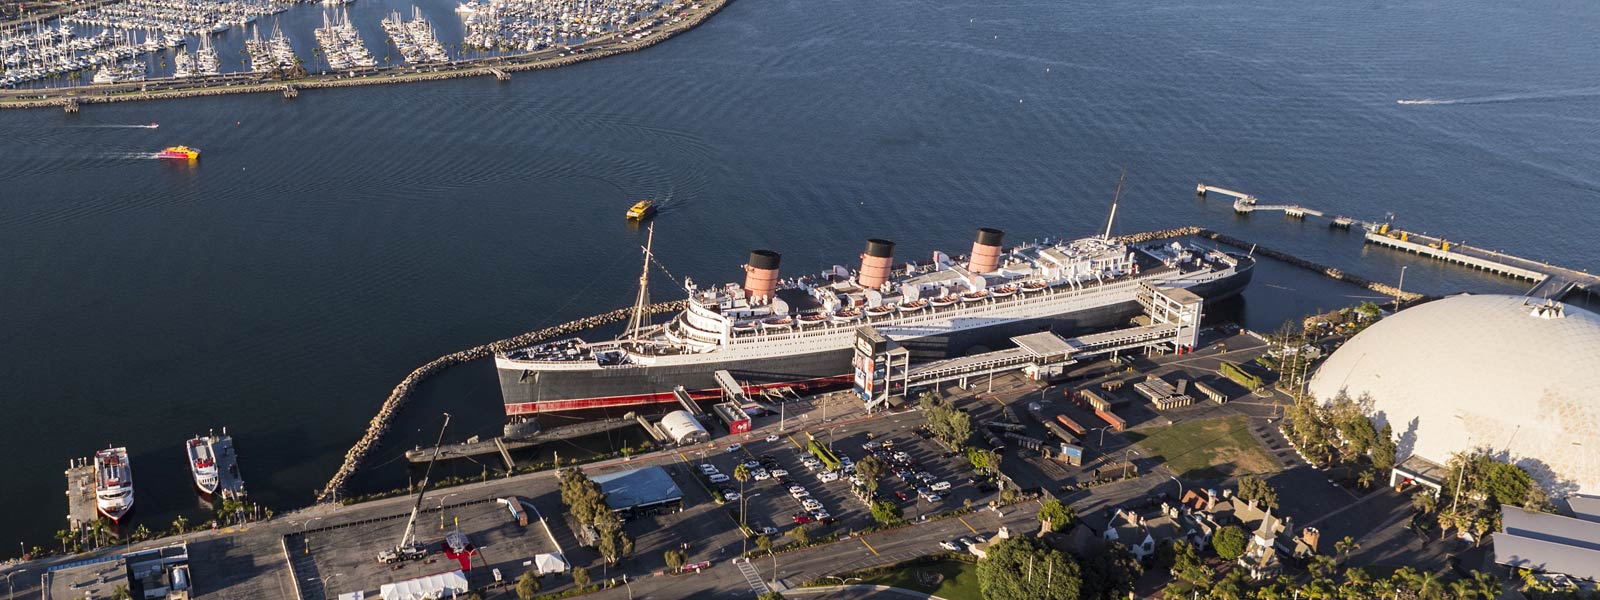 The Queen Mary cruise ship terminal from the air.